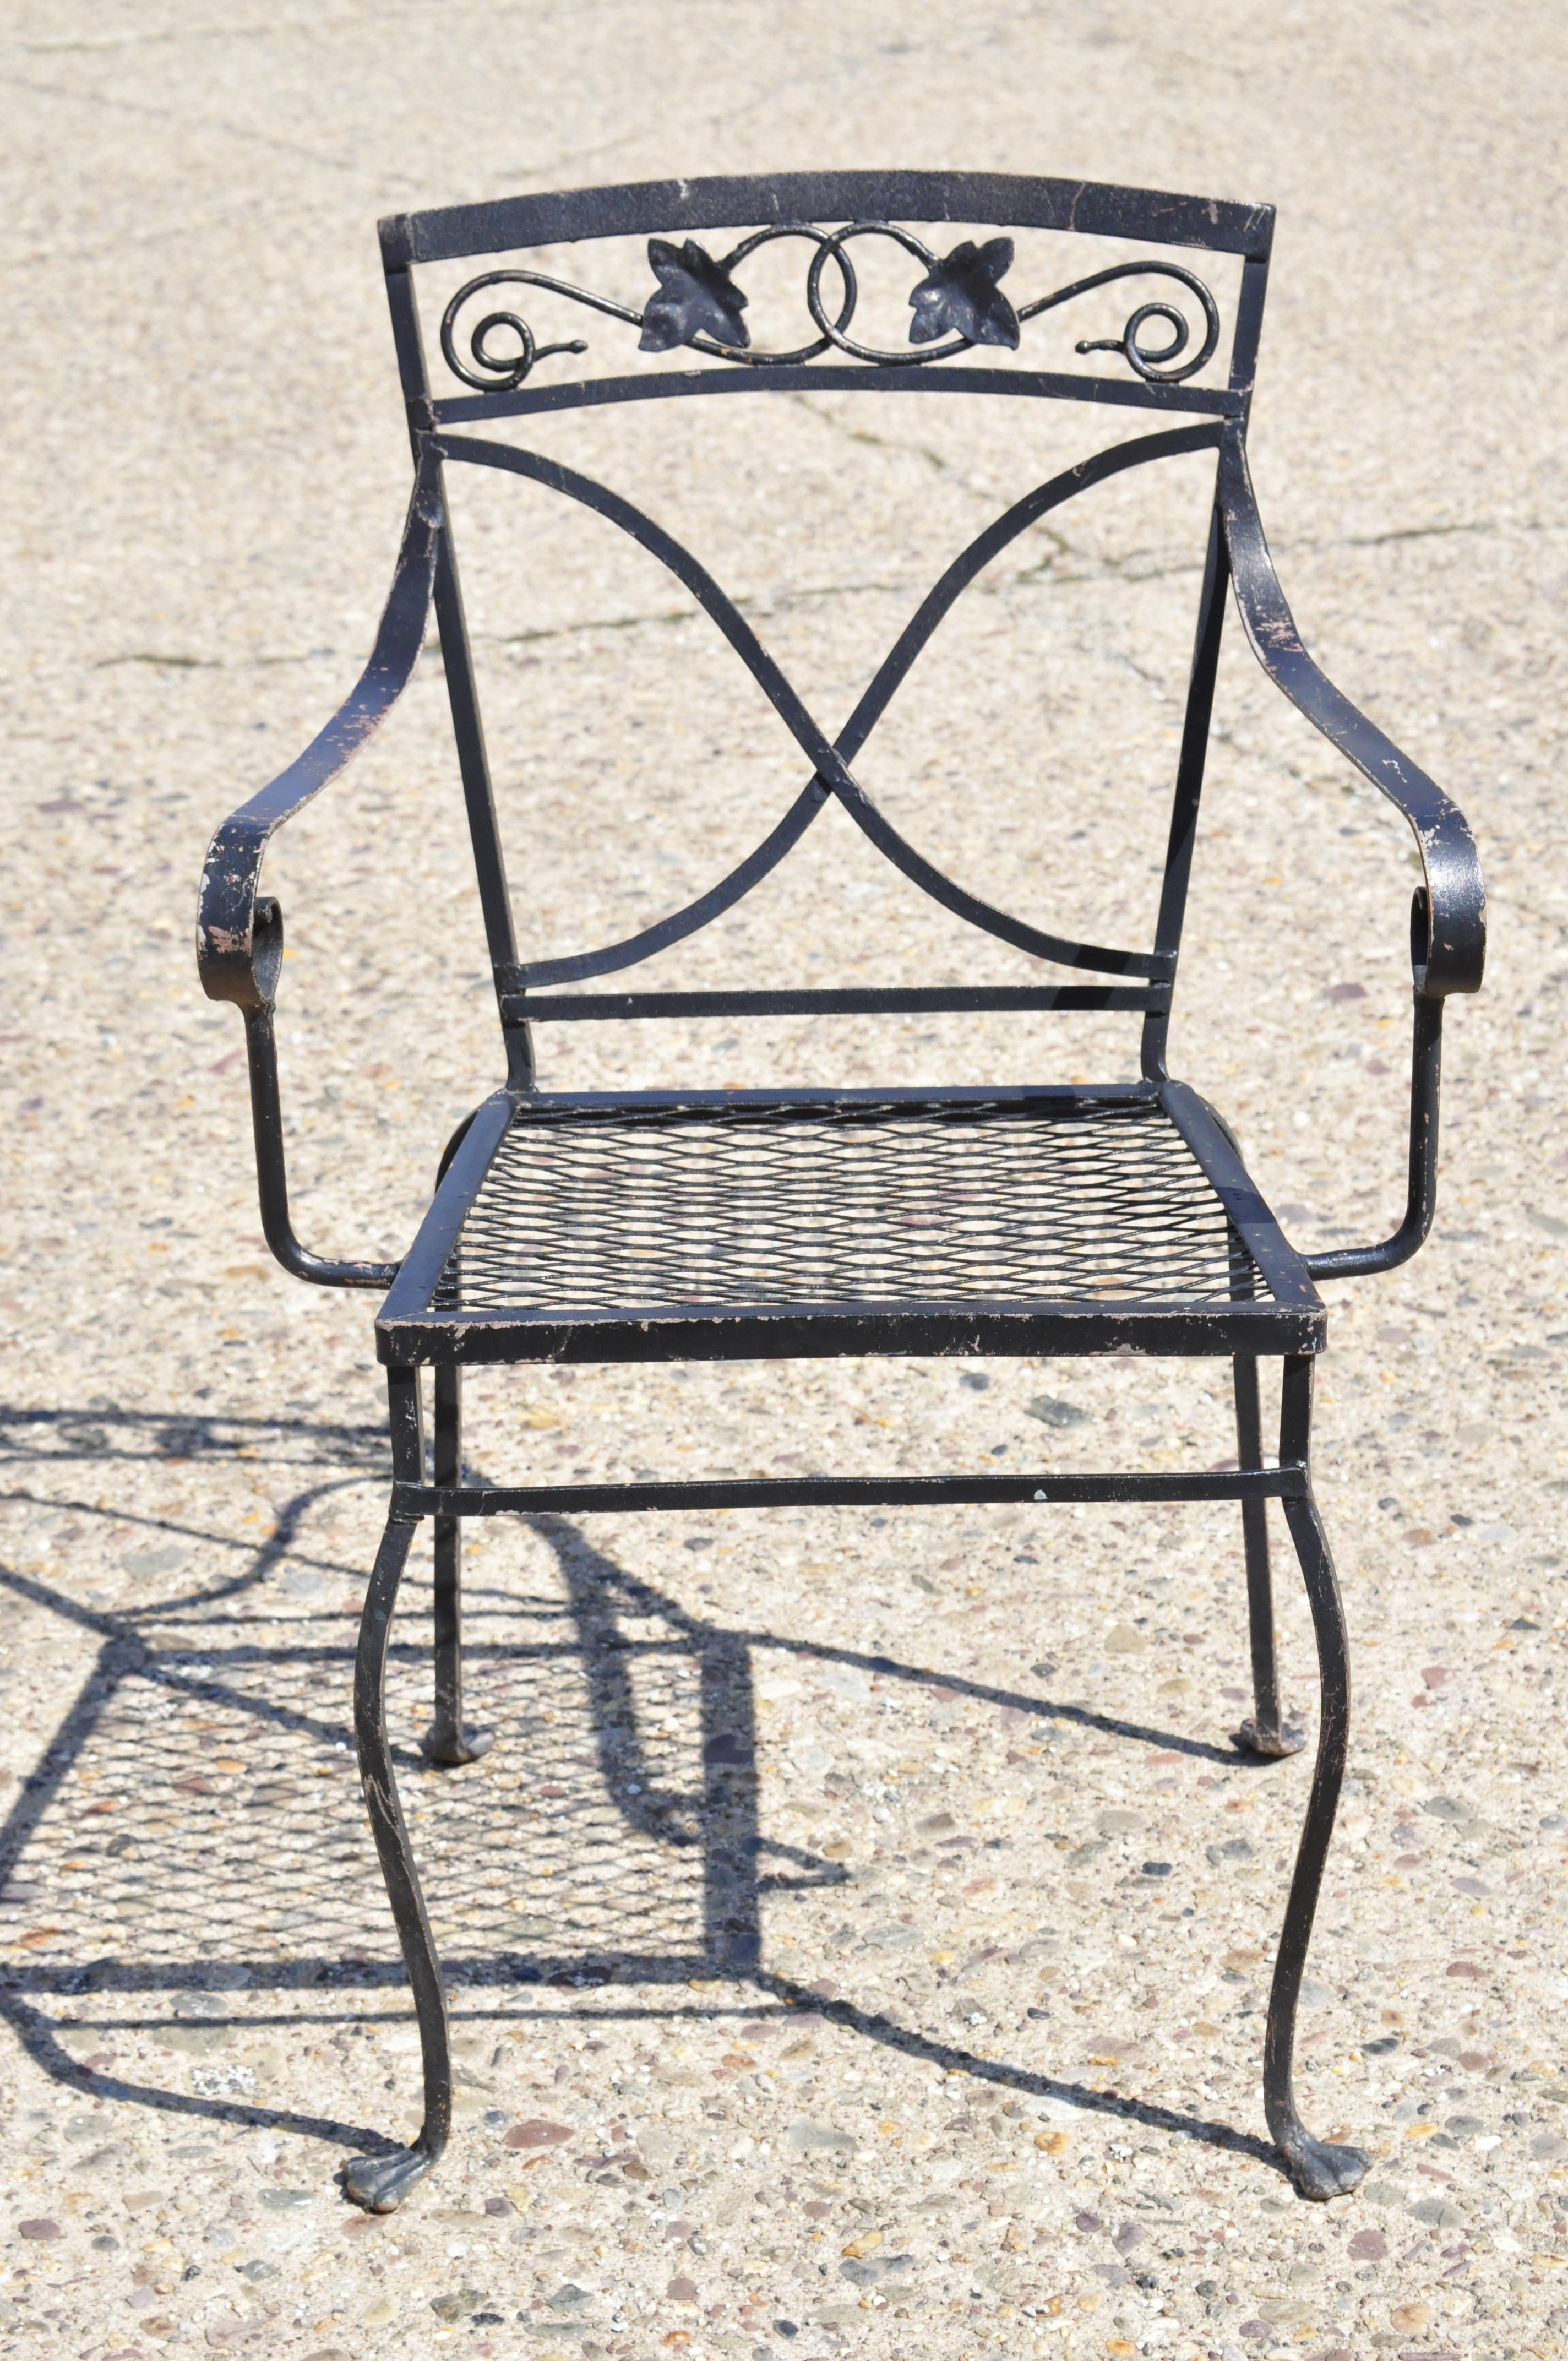 4 Salterini Mt.Vernon maple leaf stacking garden patio dining armchairs. Listing includes (4) stacking armchairs, maple leaf and vine design, metal mesh seats, wrought iron, construction, great style and form. Mid-20th century. Measurements: 33